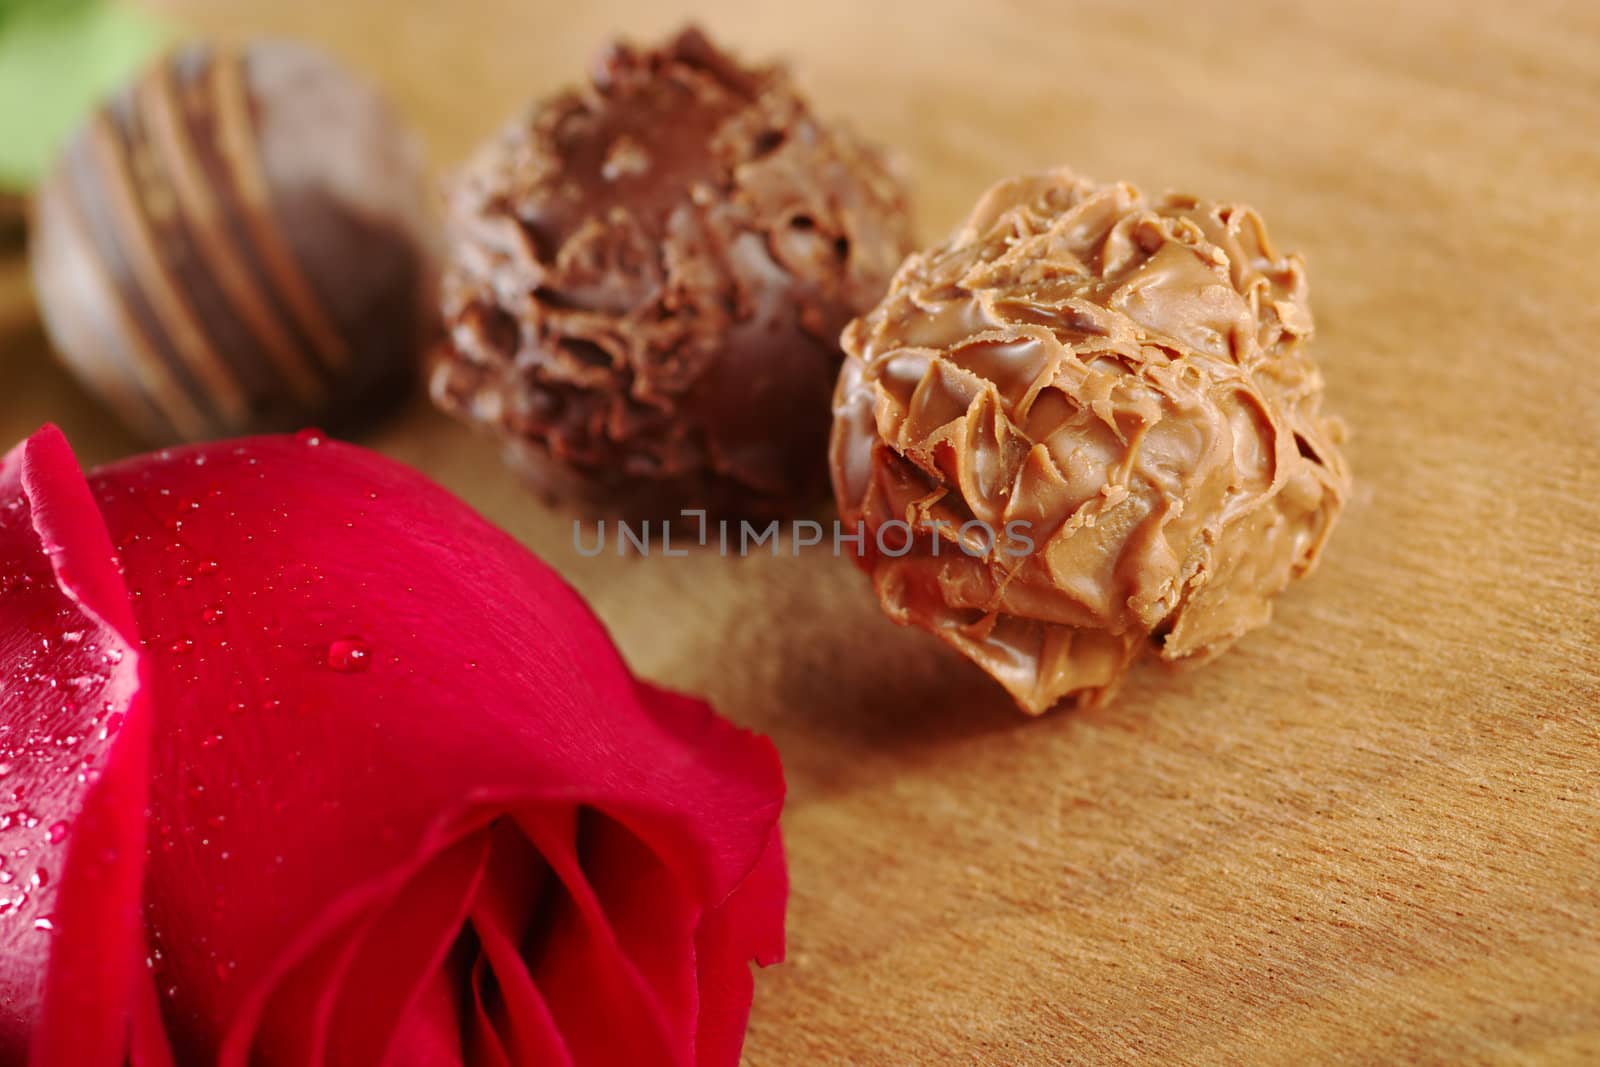 Truffles with a Red Rose by ildi